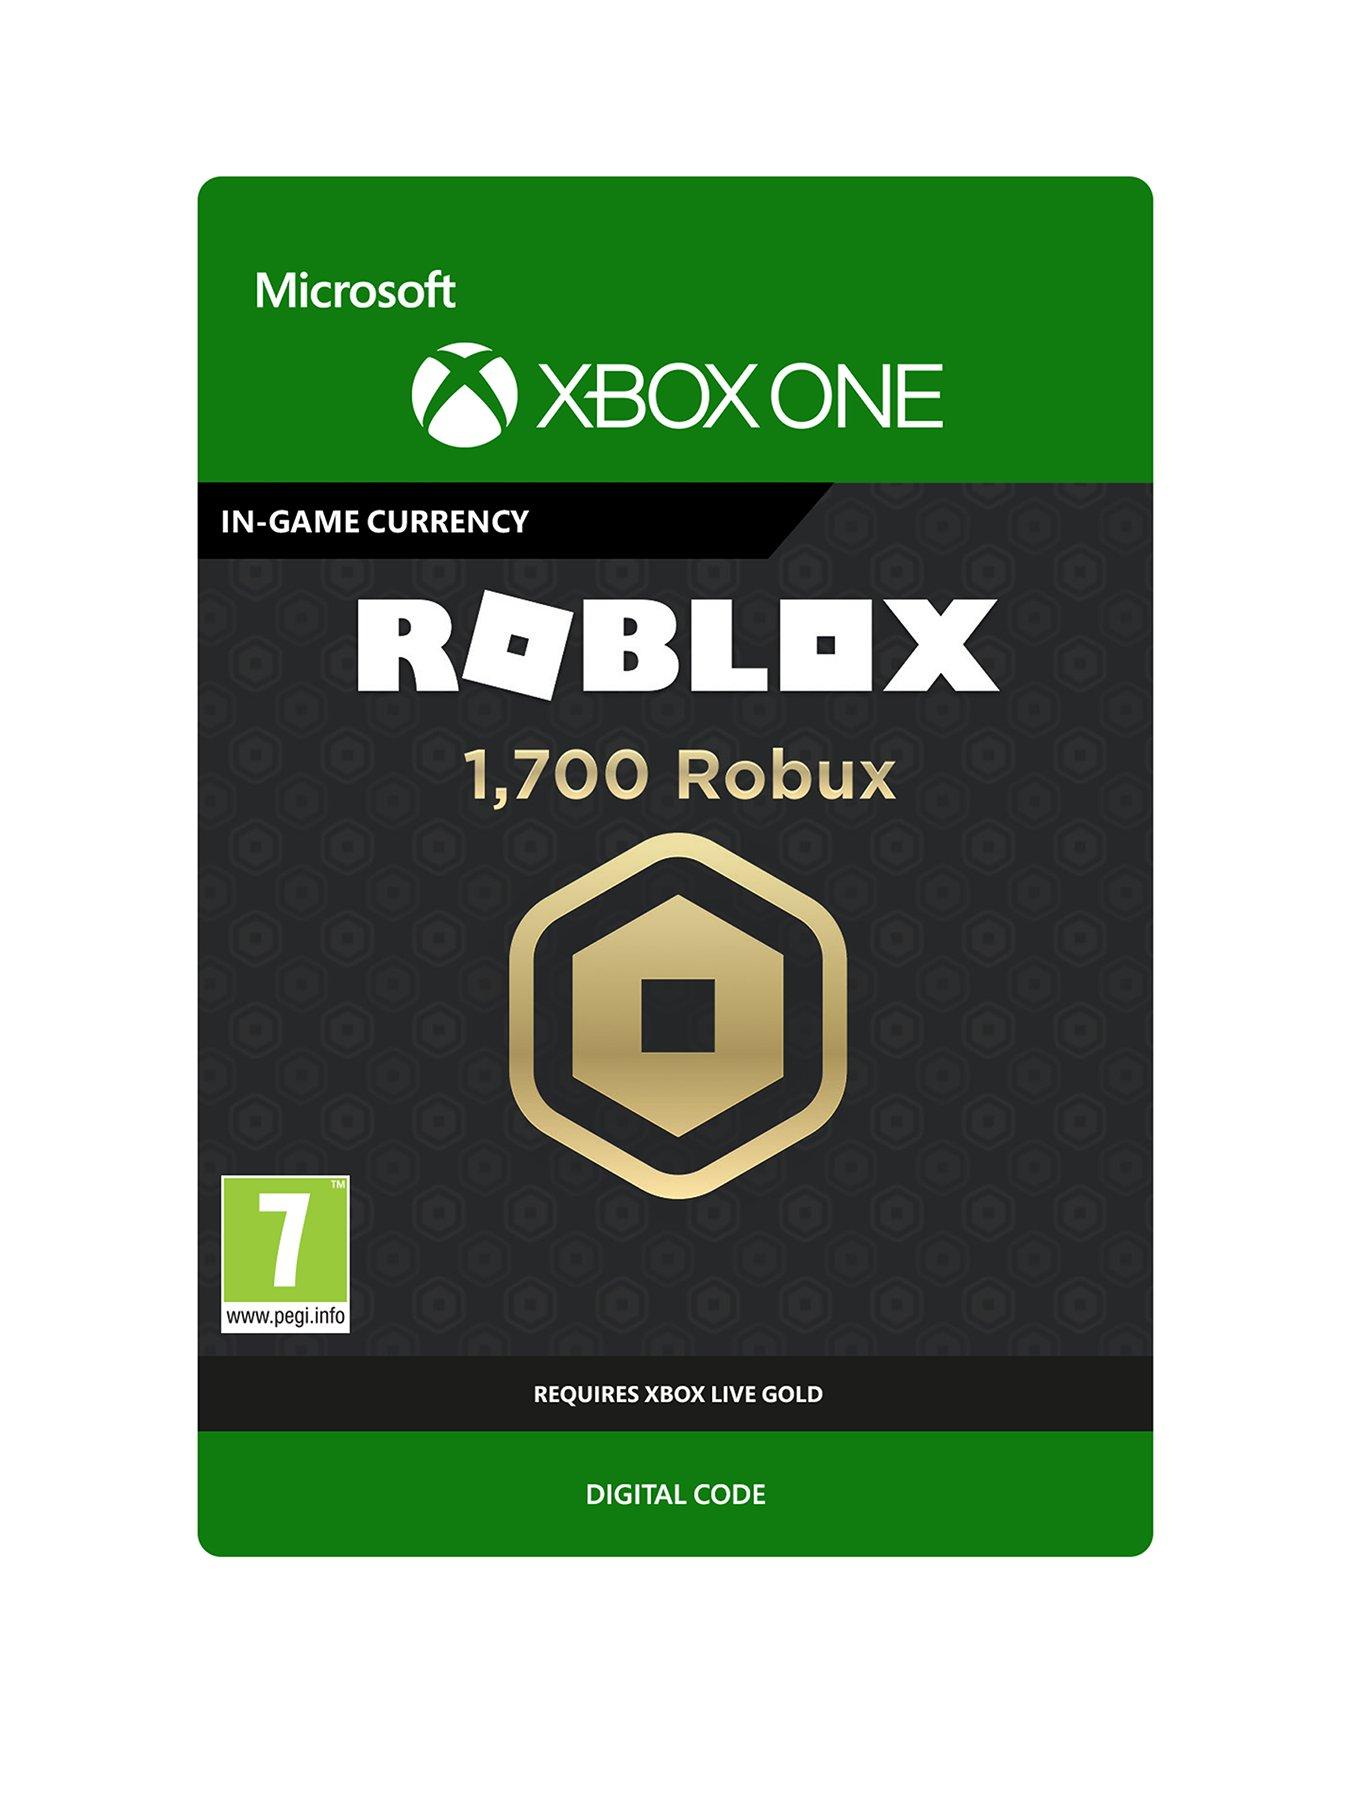 Digital Games Latest Digital Download Games Very Co Uk - roblox vehicle simulator codes xbox one get 1000 robux daily